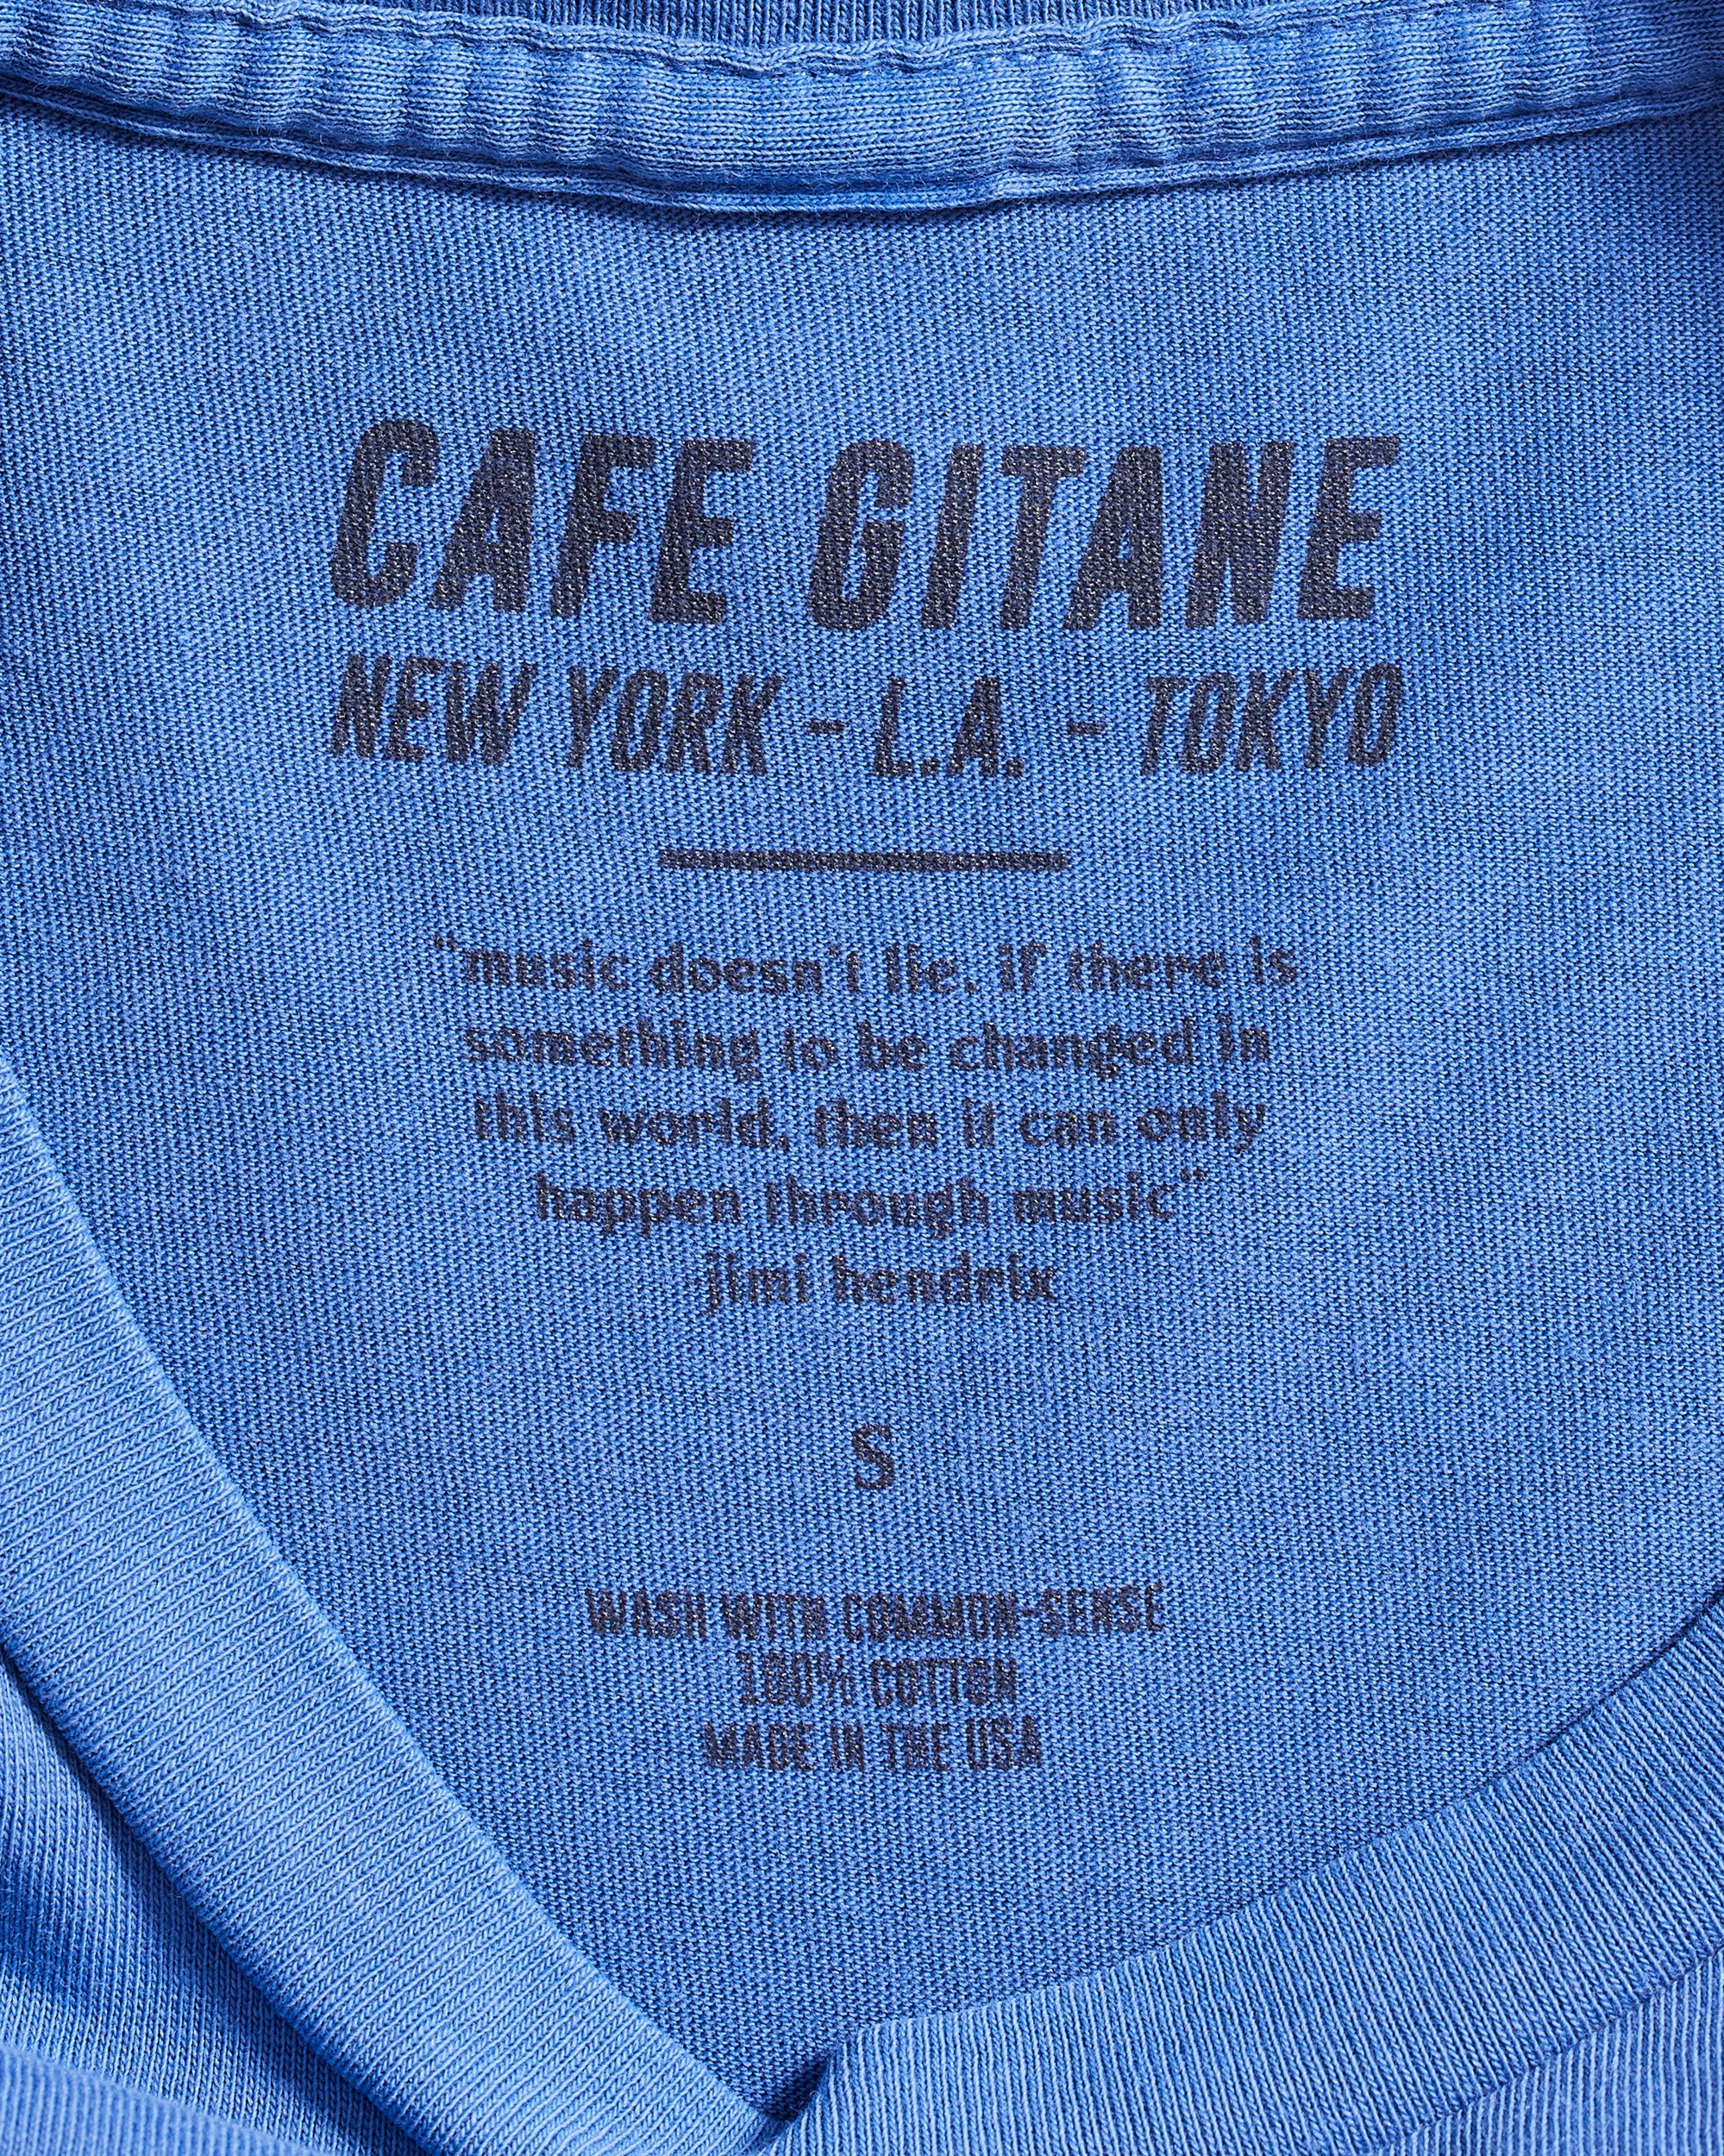 The Cafe Gitane Vintage Wash Embroidered Tee is 100% ring spun cotton. The classic t-shirt in red clay is pigment dyed which means that it has a subtle vintage look and will get more wash the older it gets. It has a printed tag inside shows the care instruction, that it is made in the USA and includes a Jimi Hendrix Quote. It also has the Cafe Gitane logo and stated the cities it has locations in: New York, Los Angeles, and Tokyo. 